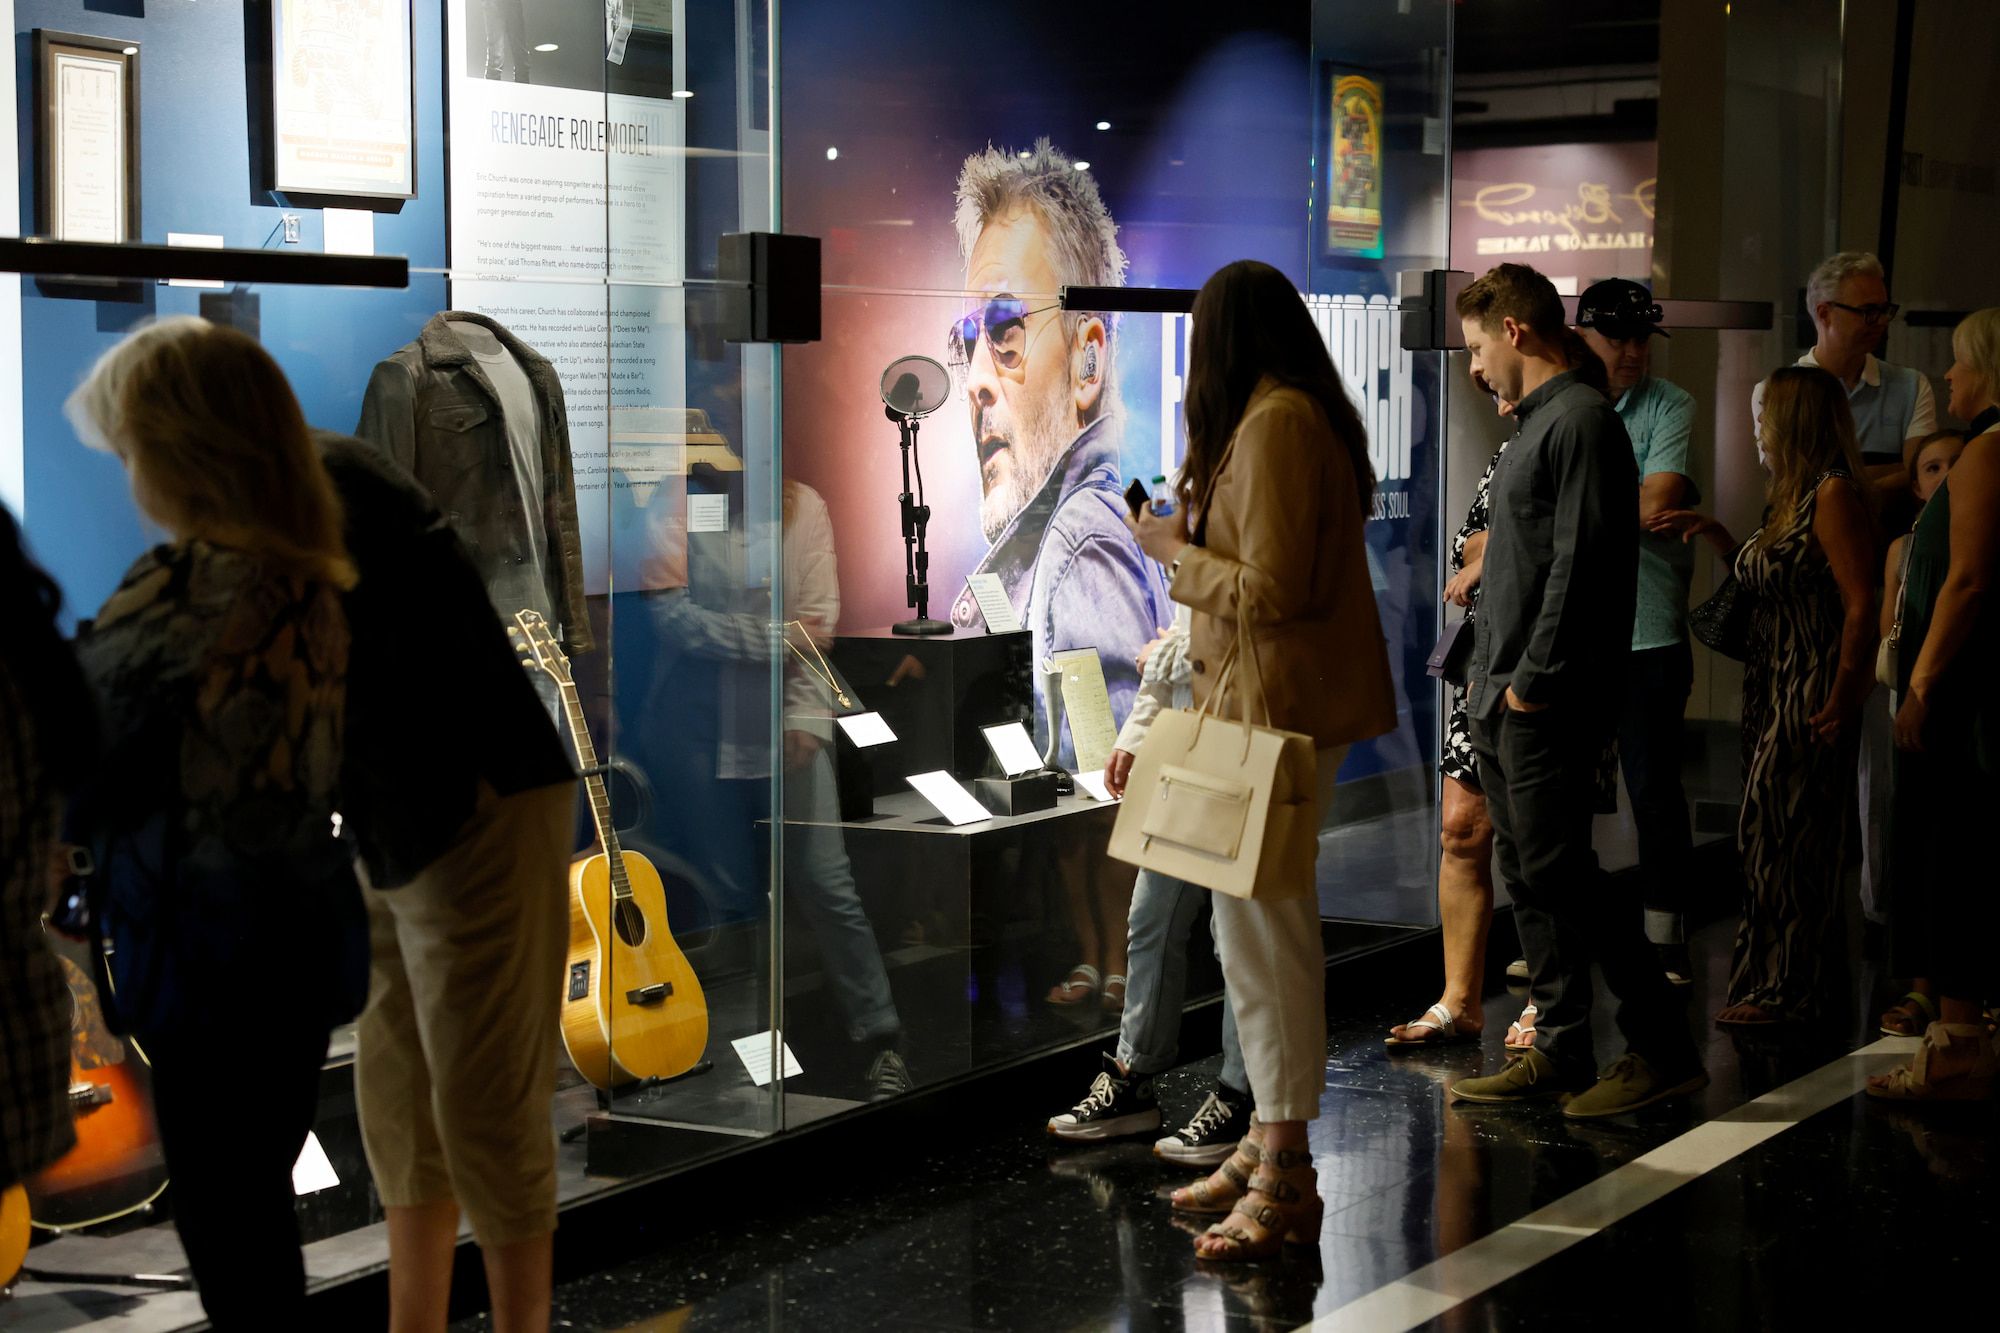 Attendees view the Country Music Hall of Fame and Museum's new exhibit, Eric Church: Country Heart, Restless Soul.